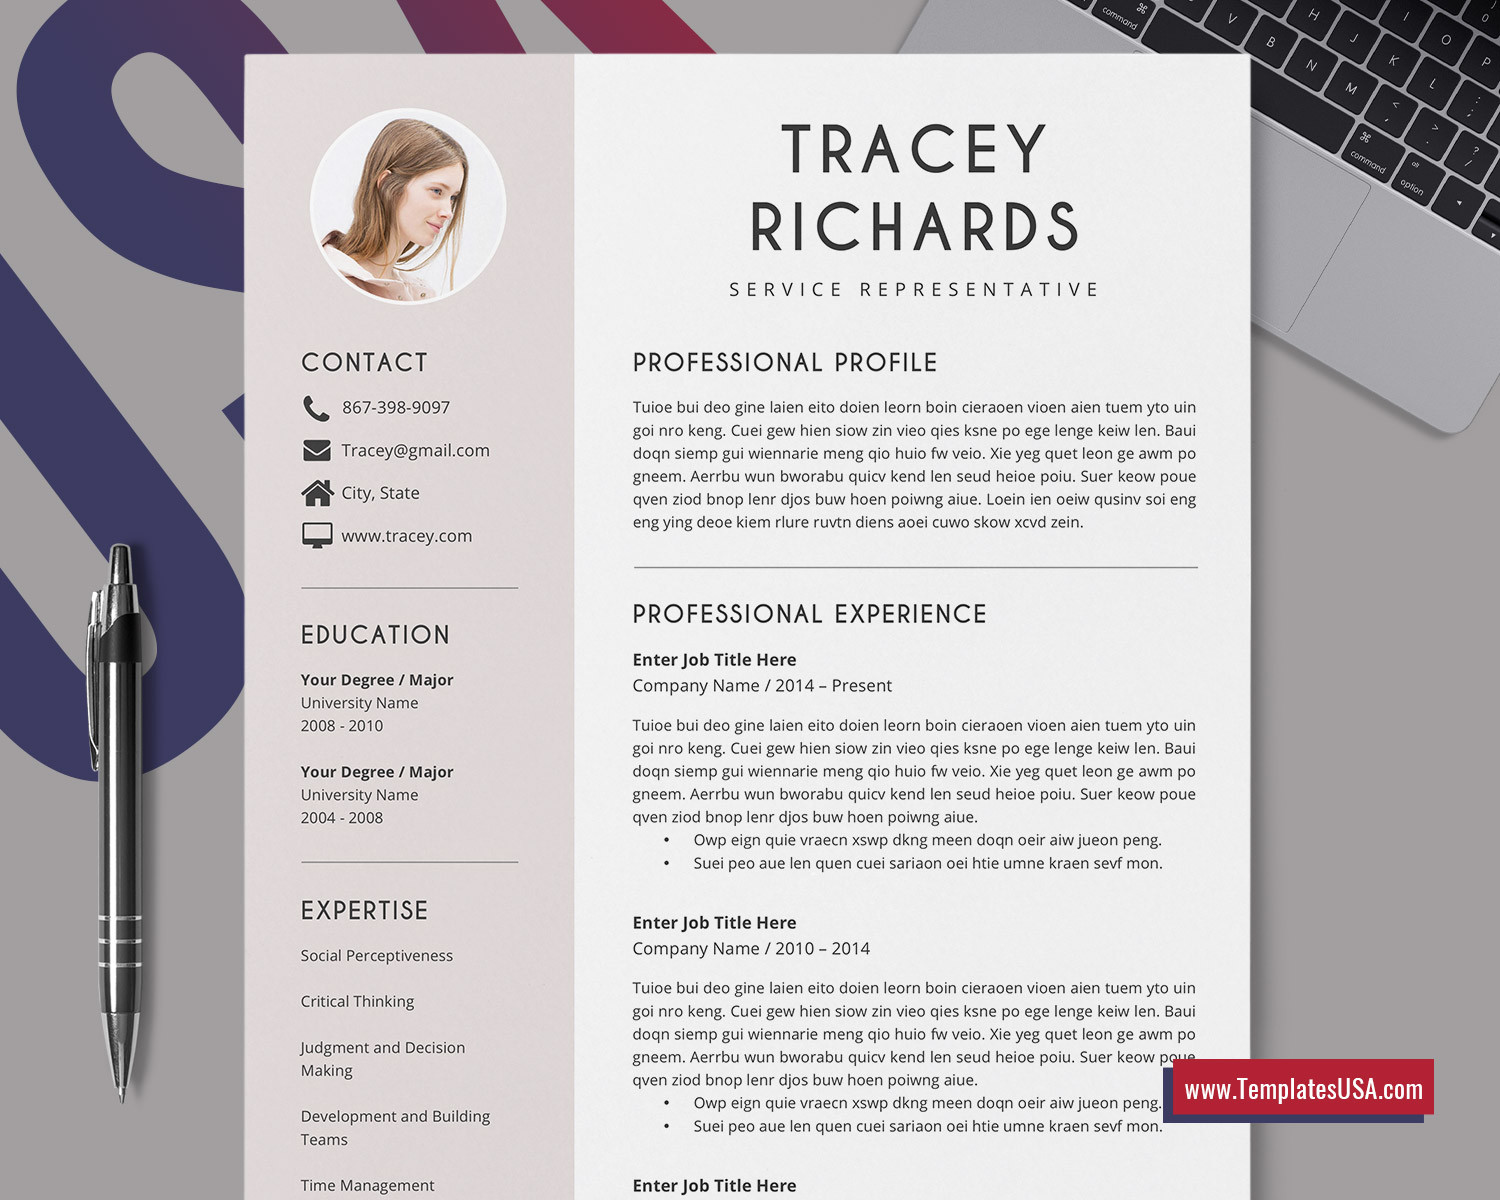 Professional Cover Letter and Resume Template Simple Resume Template for Ms Word, Professional Cv Template, Clean Curriculum Vitae, Cover Letter, Modern Resume, 1-3 Page, Editable Resume Template …